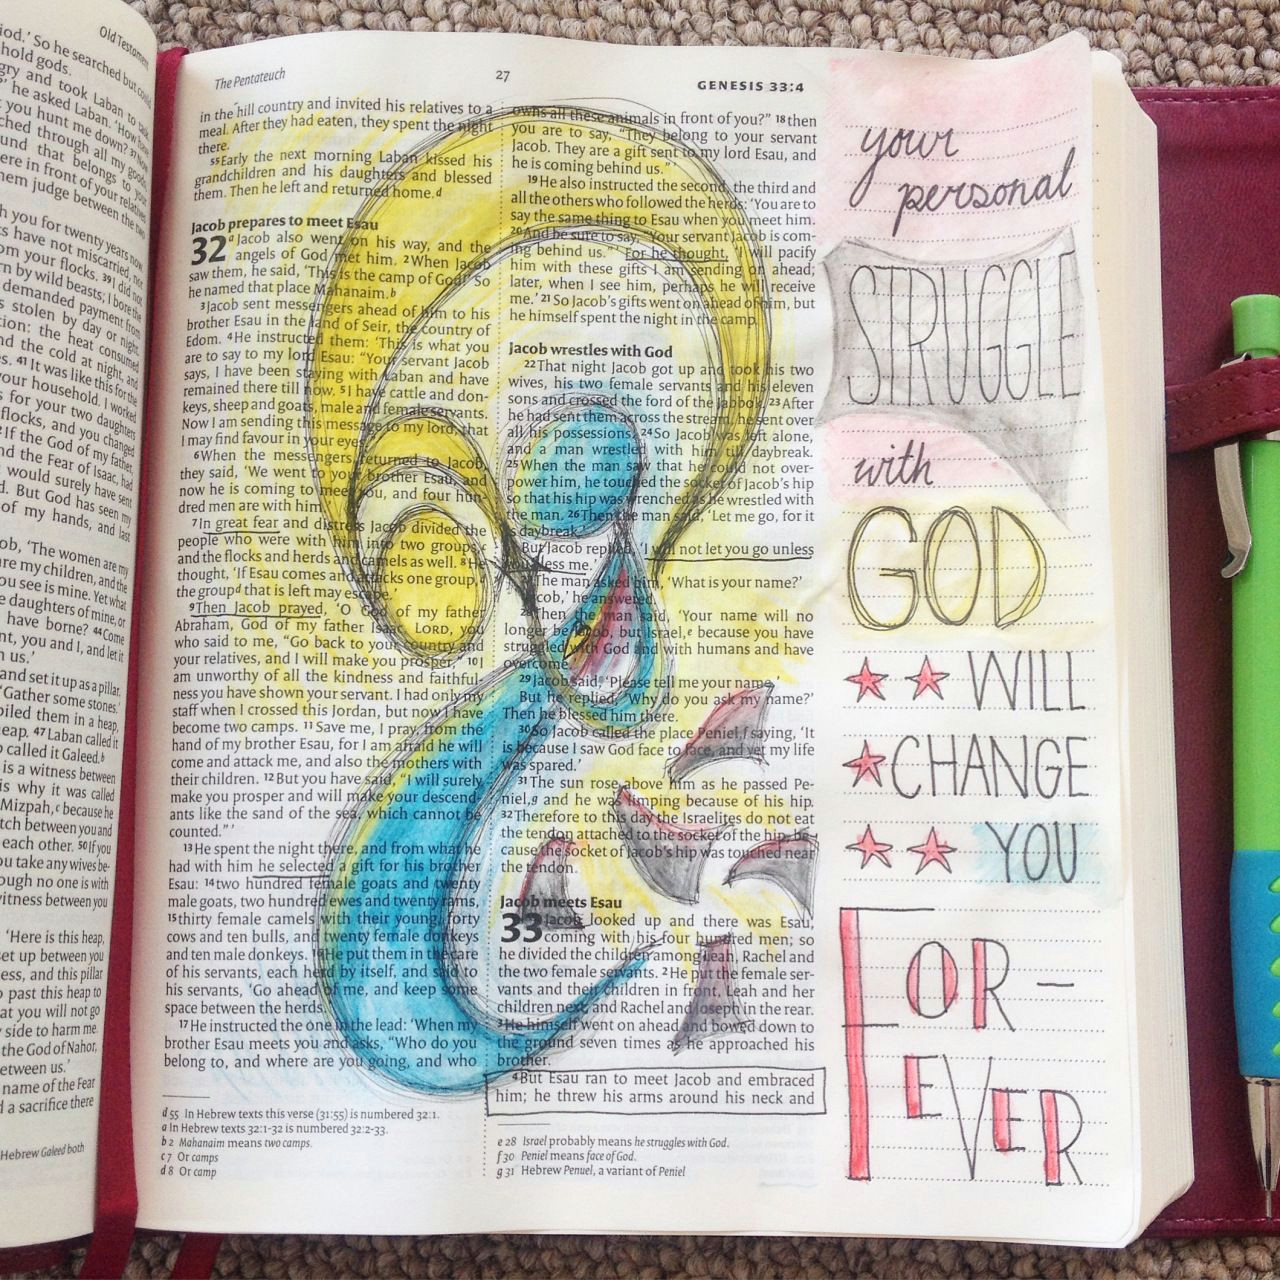 I M Drawing Closer to You Changed forever Journaling Bible Bible Art God